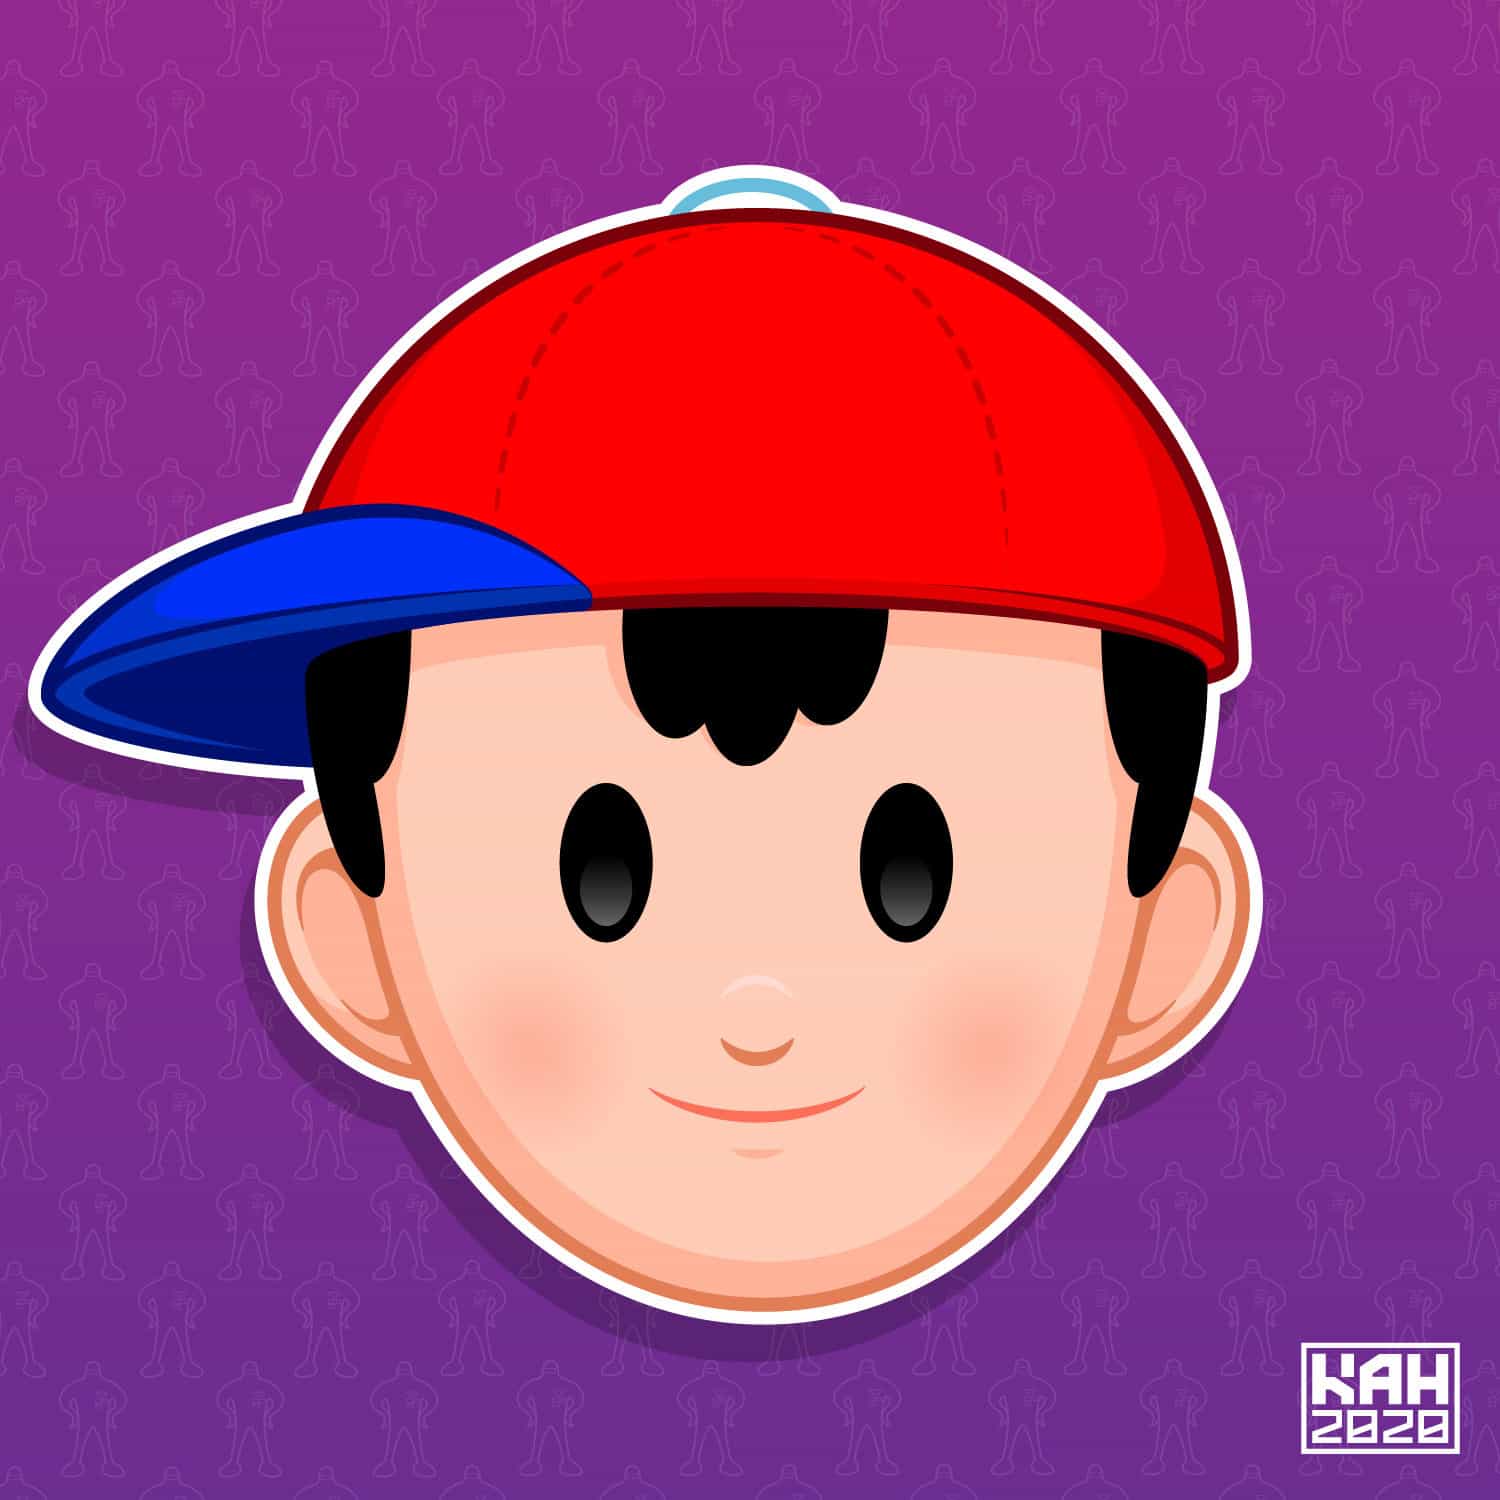 Ness Ninten Sticker for iOS & Android